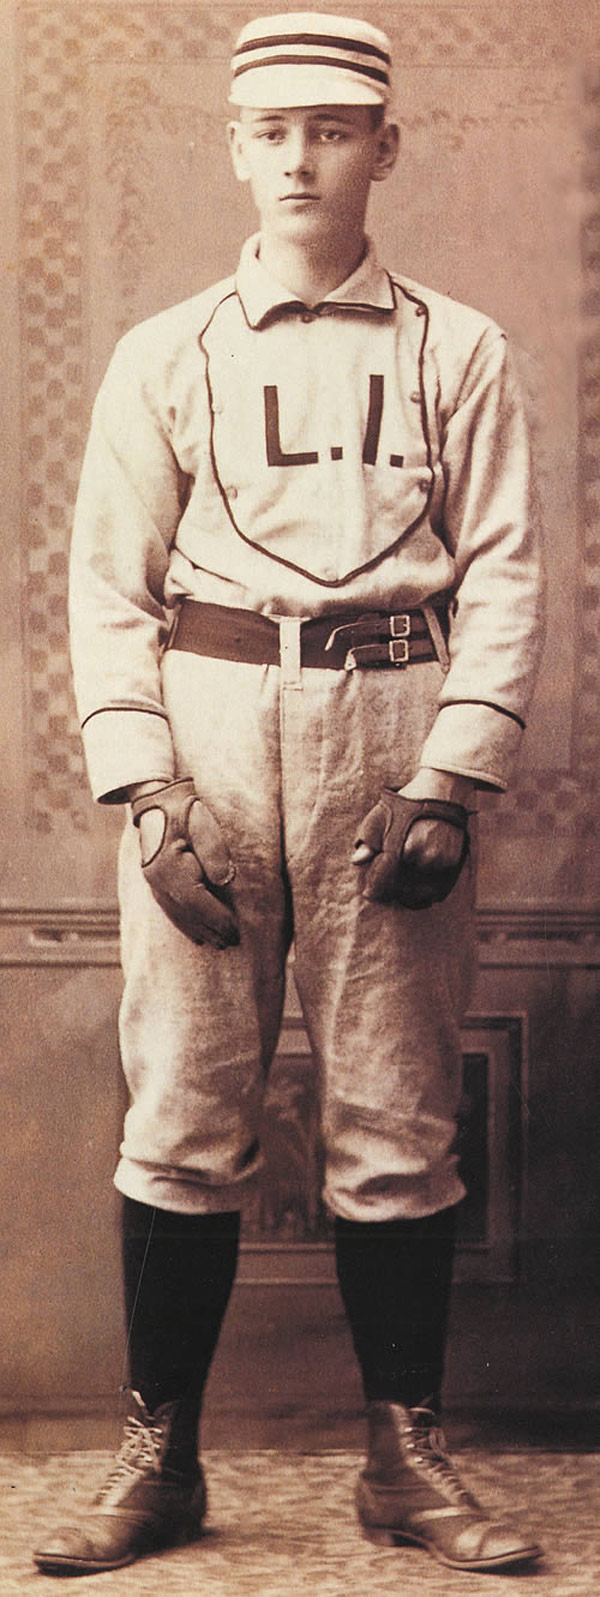 Baseball history photo: Catcher circa 1890.  Note the fact that this player is wearing two gloves and the fingerless glove, used on the throwing hand, indicates that he threw left-handed, which perhaps not an odd site in the 19th century.  Click photo to return to previous page.